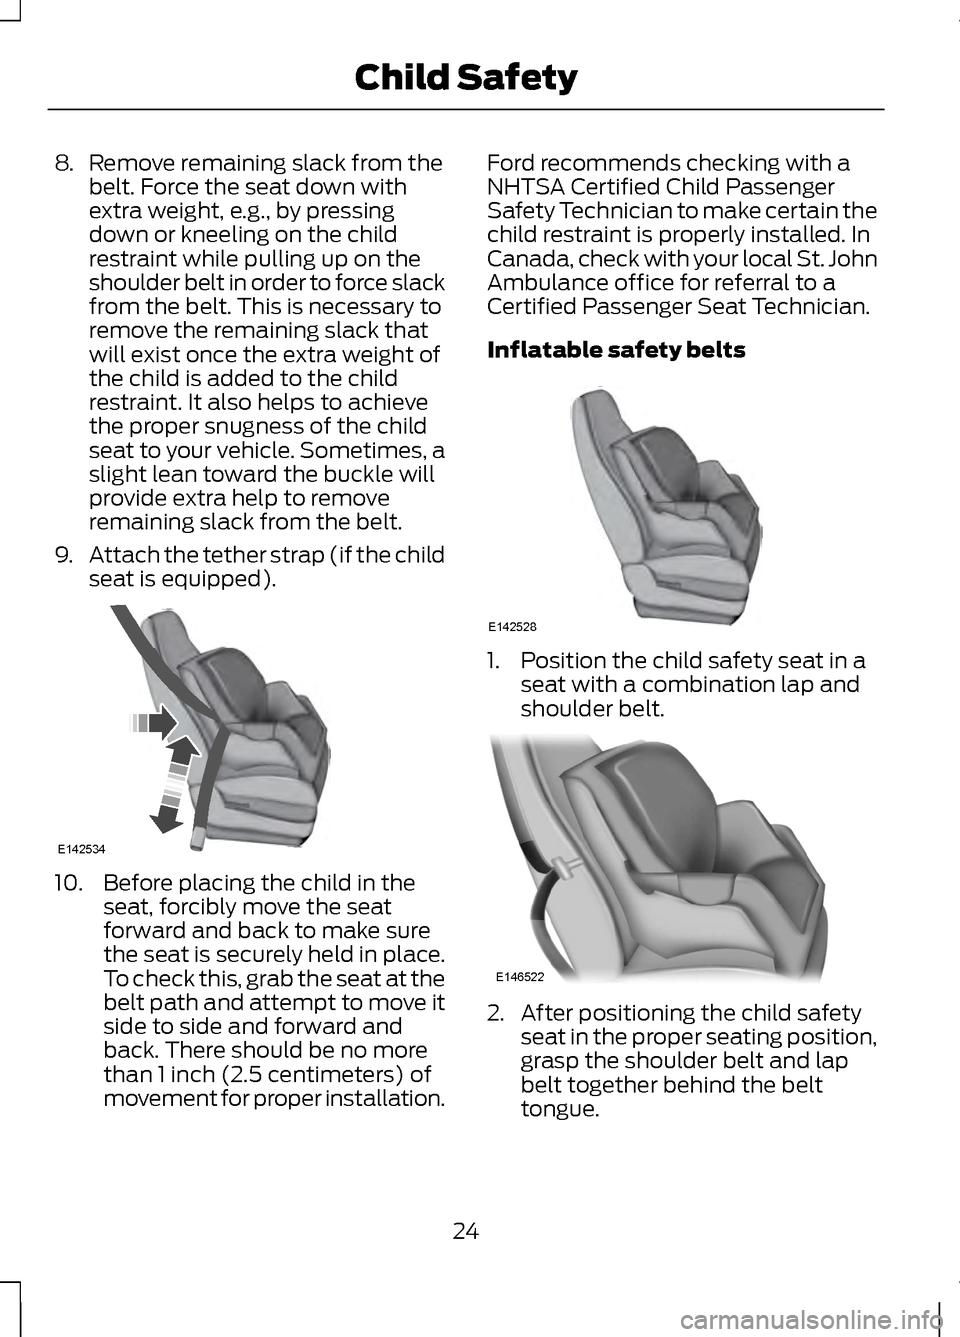 LINCOLN MKZ 2013  Owners Manual 8.
Remove remaining slack from the
belt. Force the seat down with
extra weight, e.g., by pressing
down or kneeling on the child
restraint while pulling up on the
shoulder belt in order to force slack
